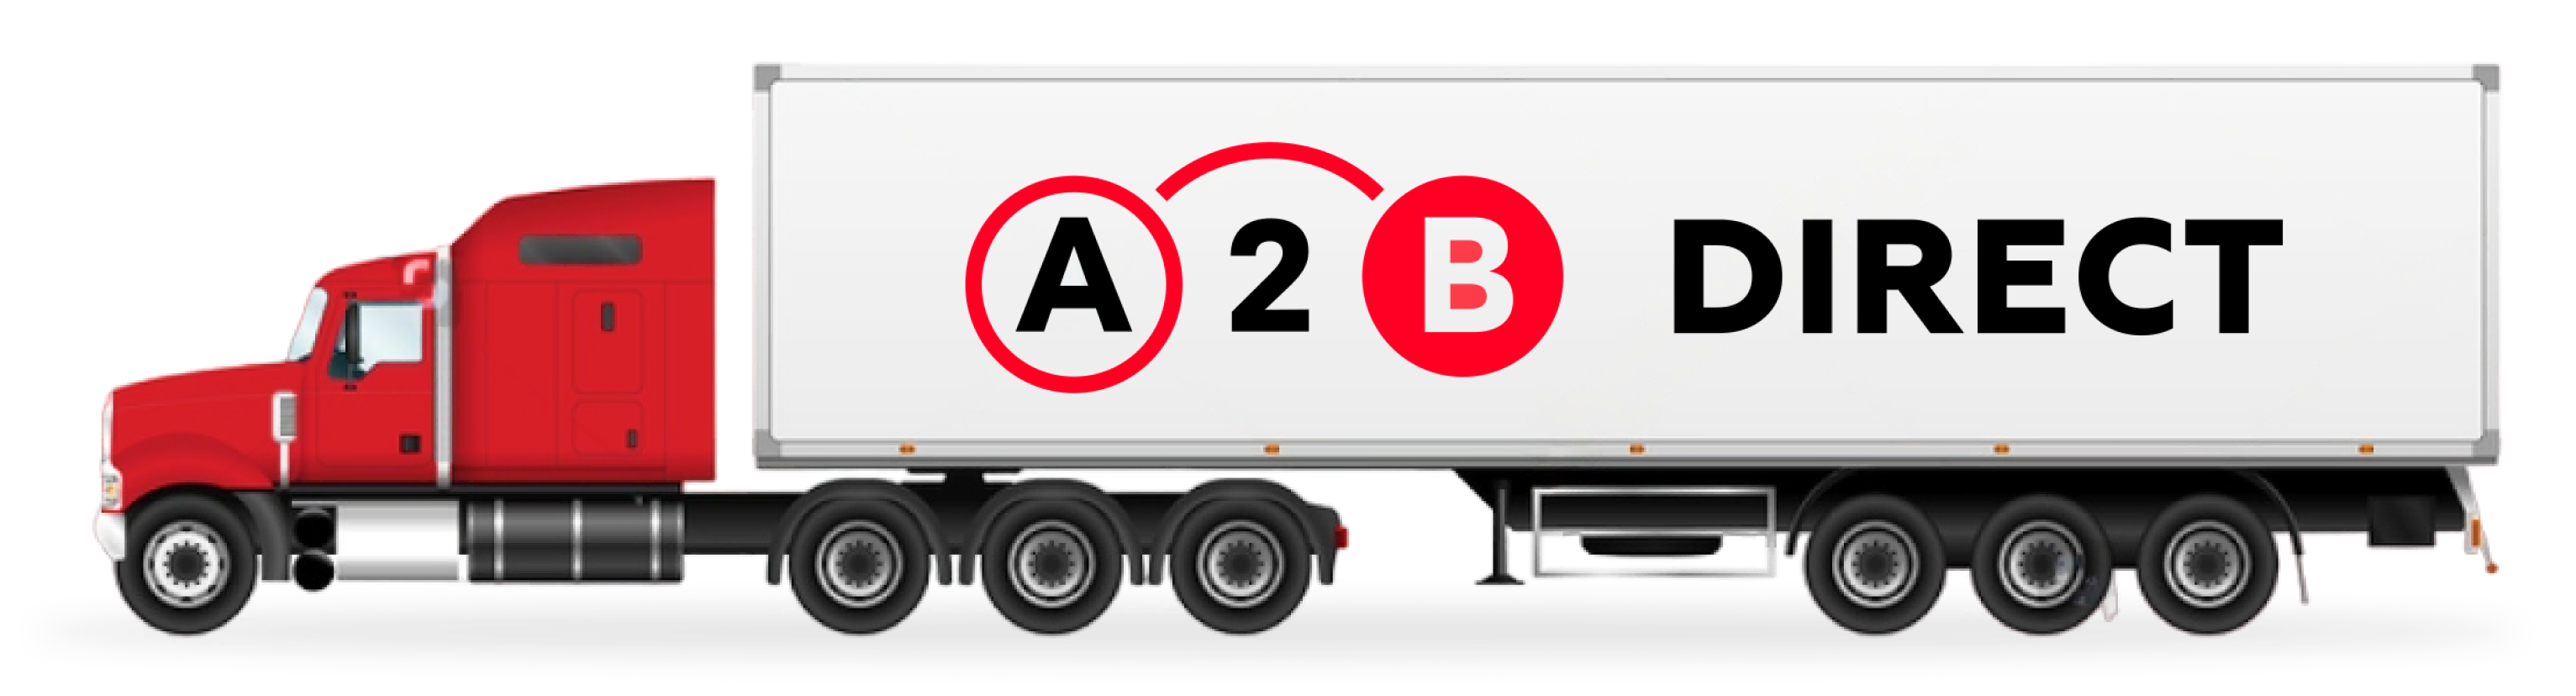 A2B Direct`s journey from an MVP to Robust Logistics Marketplace